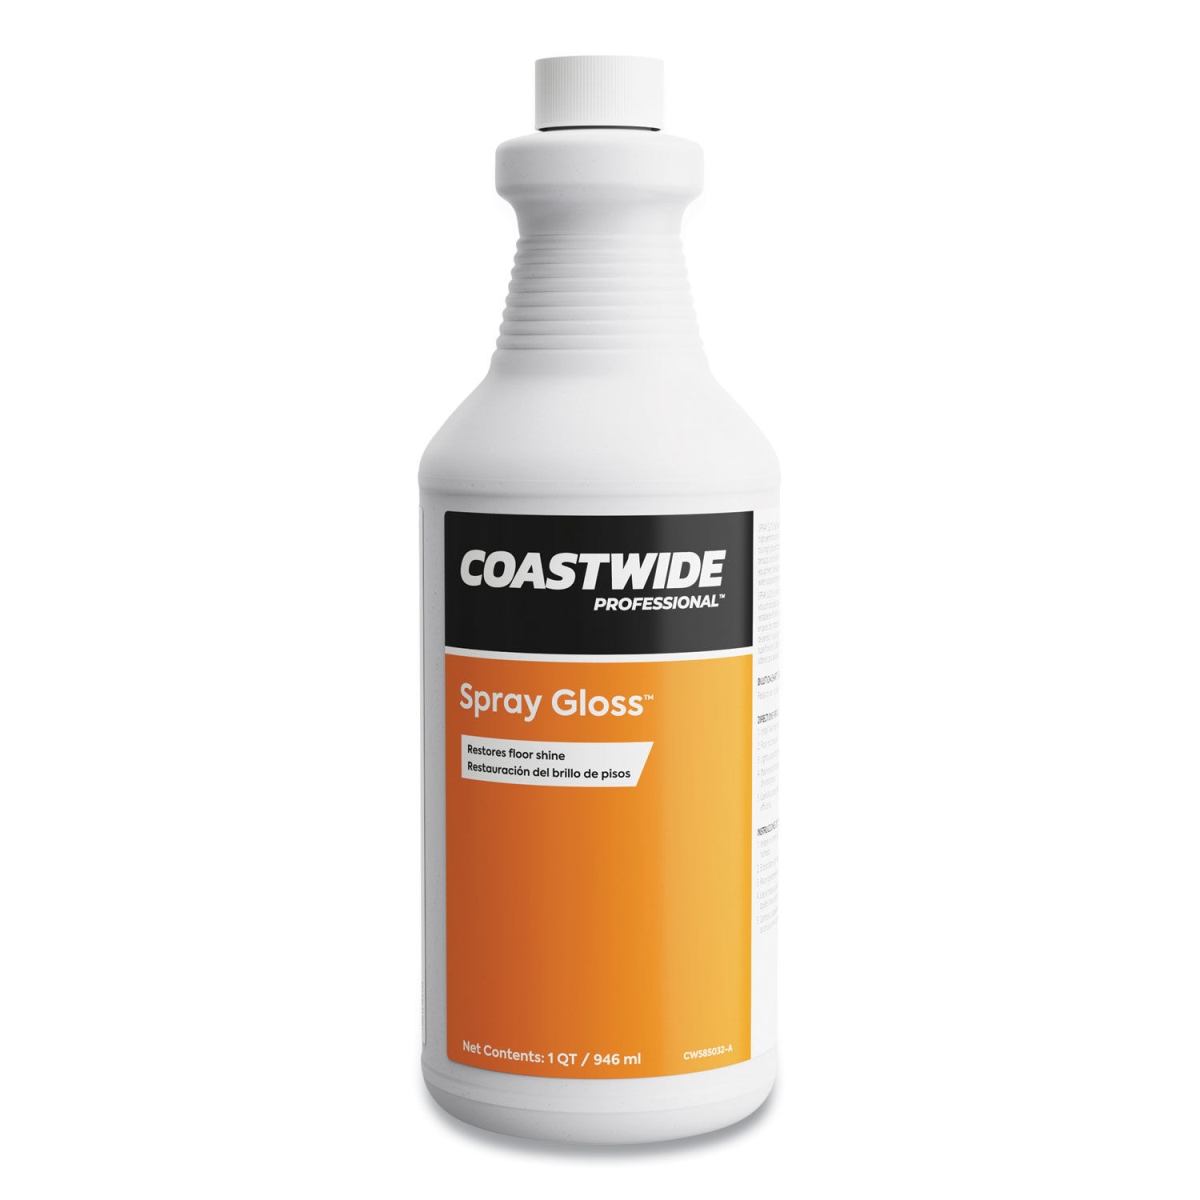 Picture of Coastwide Professional CW585032-A 0.95 Liter Peach Scent Spray Gloss Floor Cleaners & Sealer - 6 per Case